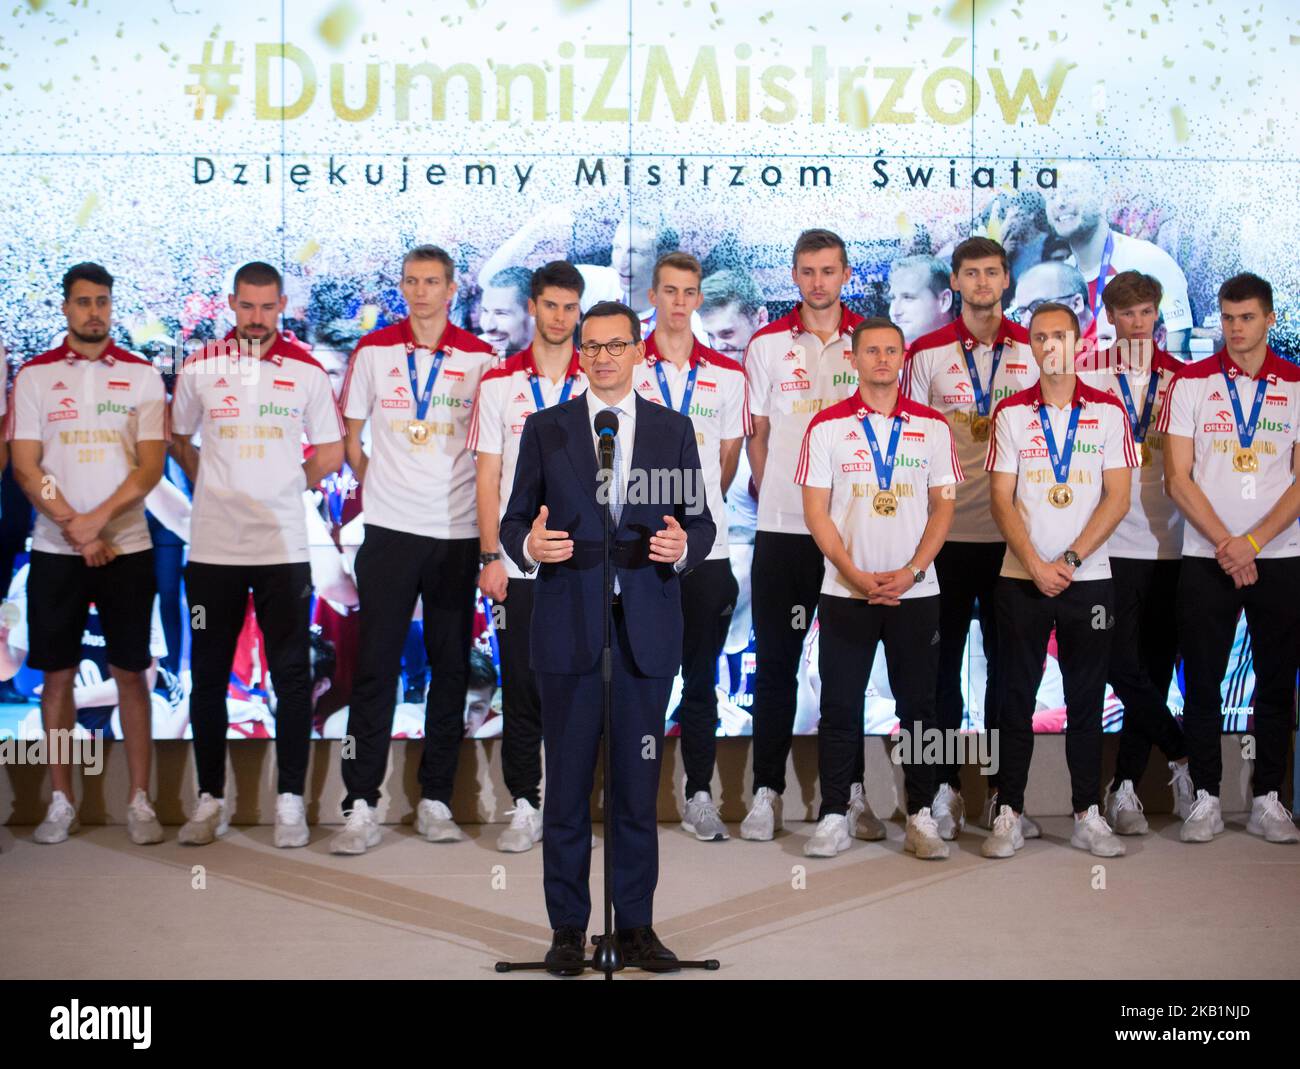 Prime Minister of Poland Mateusz Morawiecki during the meeting with Poland men's national volleyball team at Chancellery of the Prime Minister in Warsaw, Poland on 1 October 2018. Poland won the gold medal after defeating Brazil in FIVB Volleyball Men's World Championship Final in Turin on 30 September. (Photo by Mateusz Wlodarczyk/NurPhoto) Stock Photo